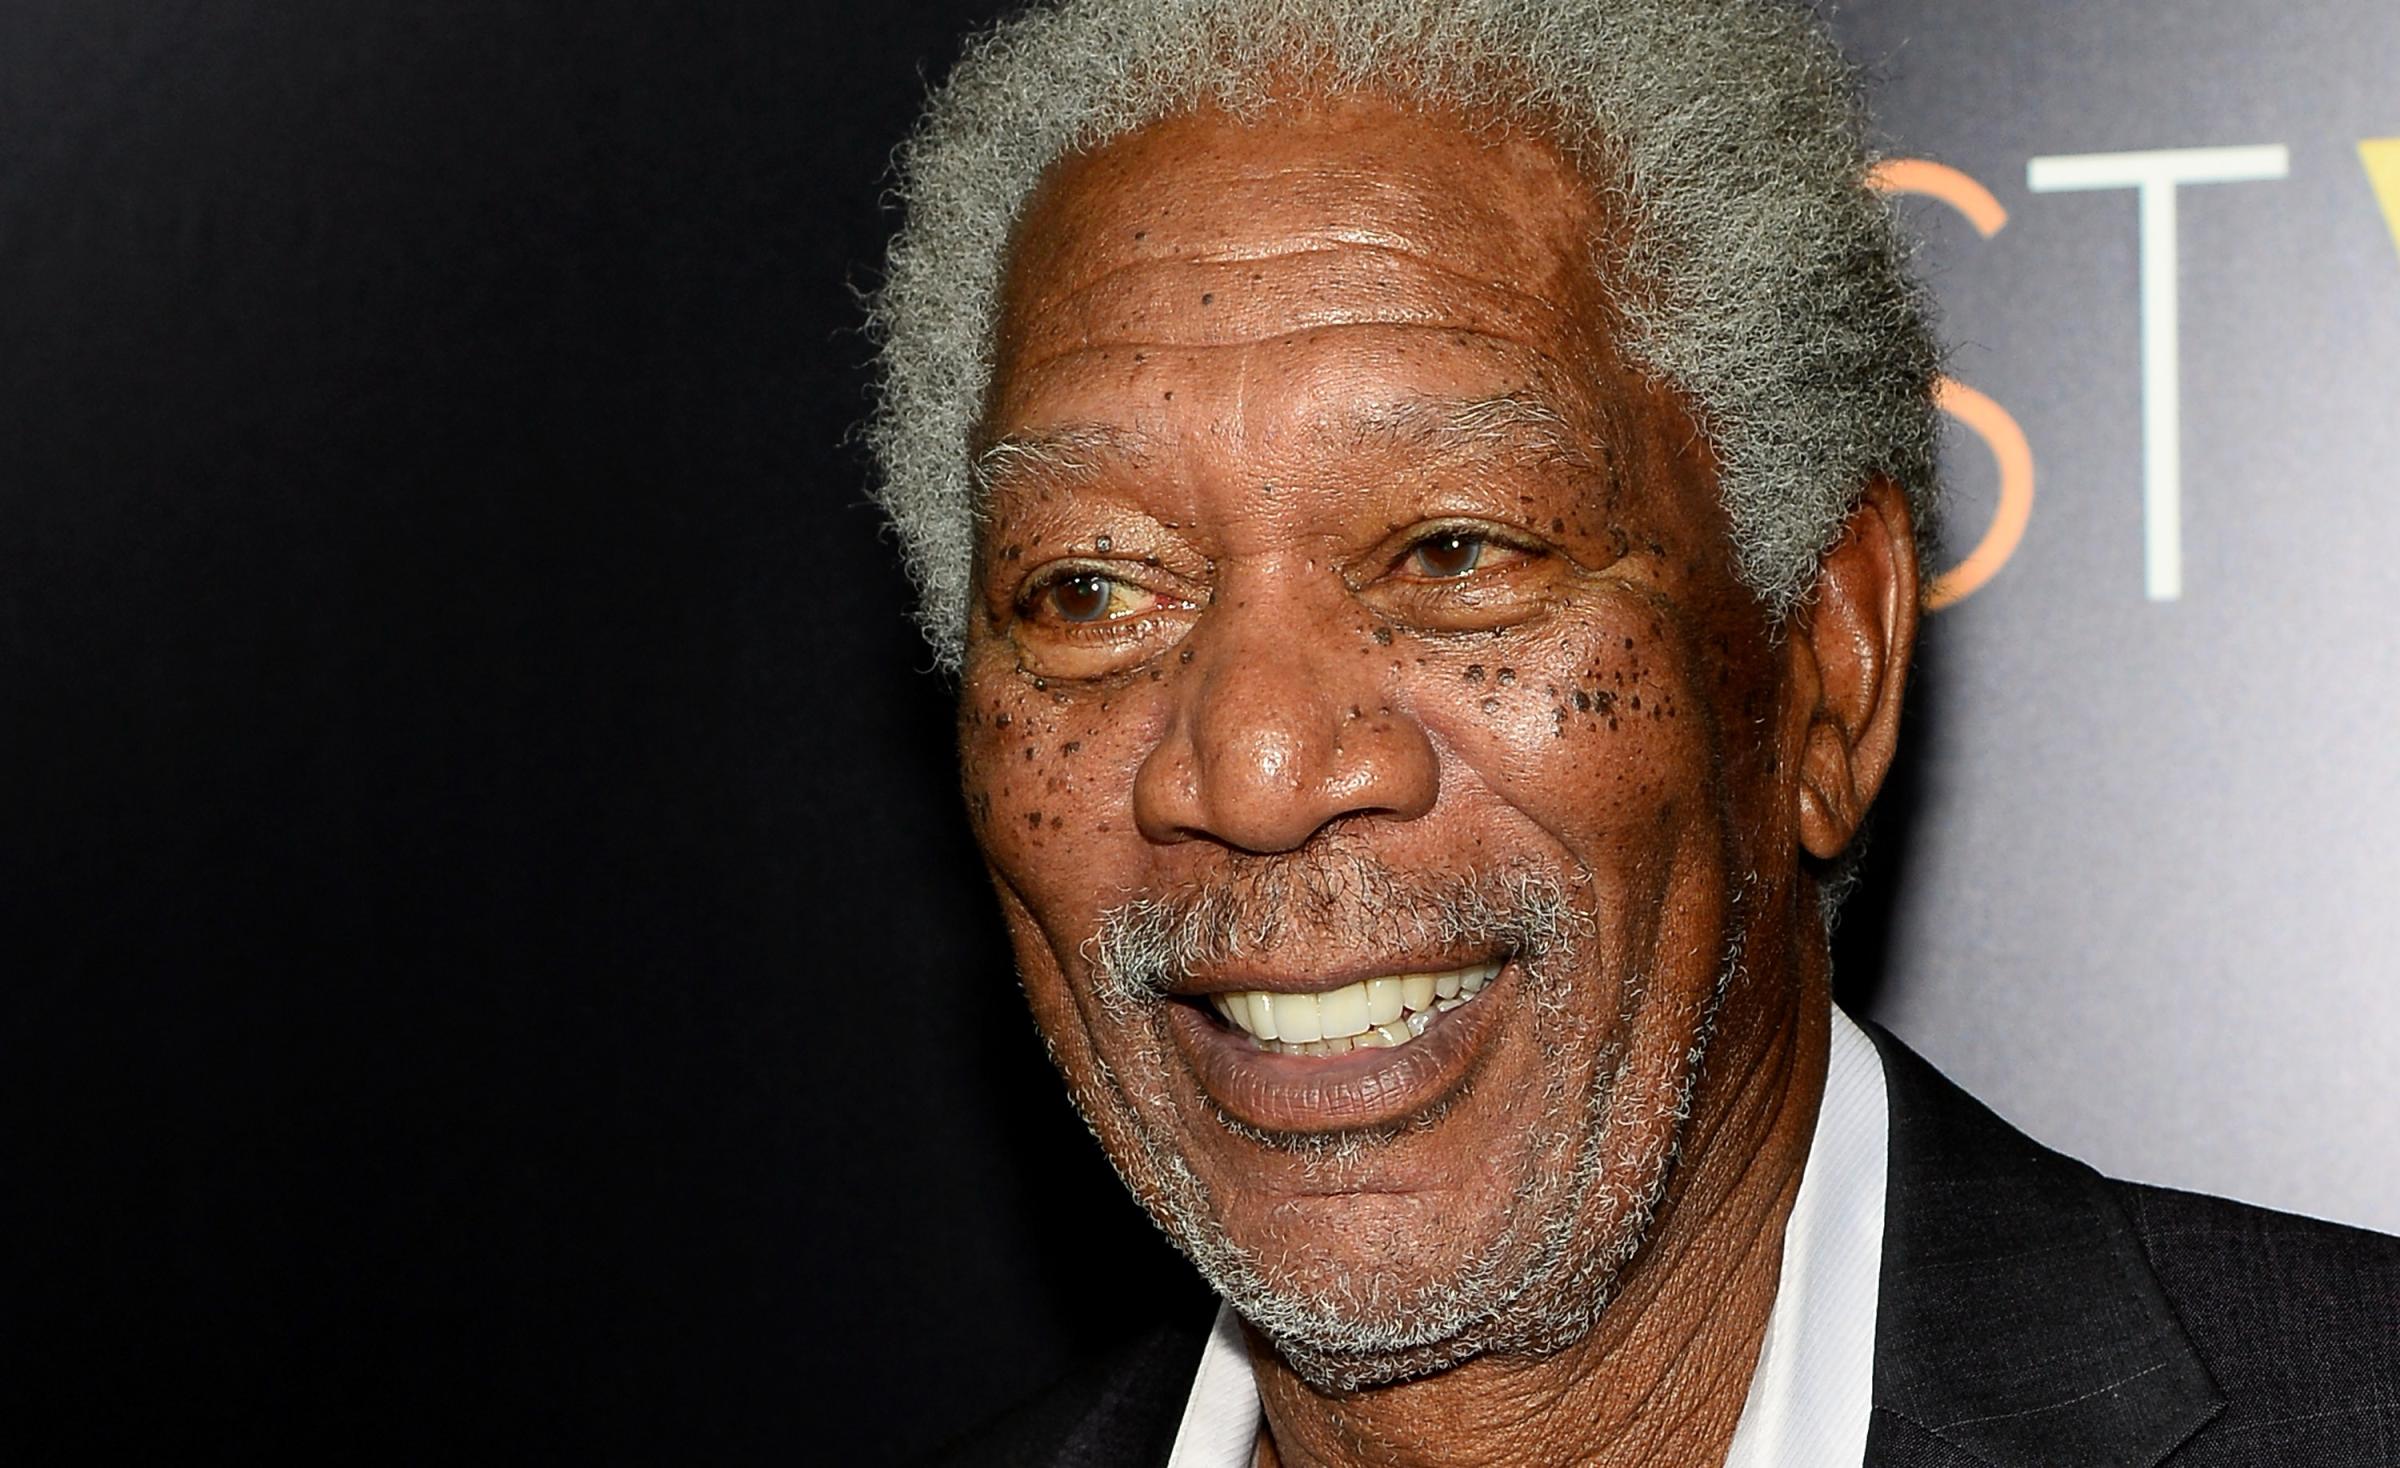 Morgan Freeman at the after party for a screening of CBS Films' "Last Vegas" in Las Vegas on Oct. 18, 2013.